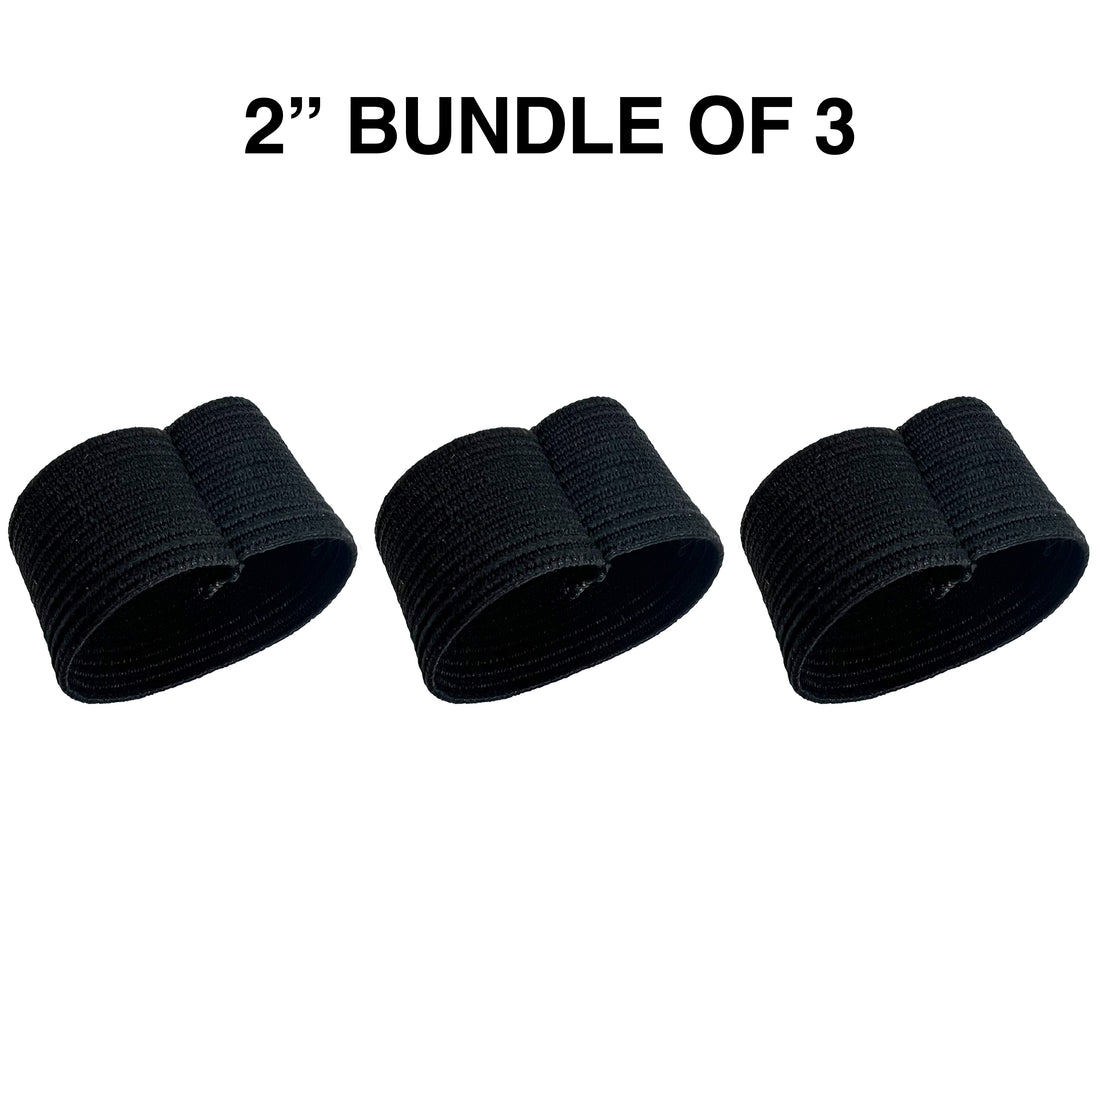 Strap Keeper / For 1" + 2" Straps / Bundle of 3 | Ships in 1 Week